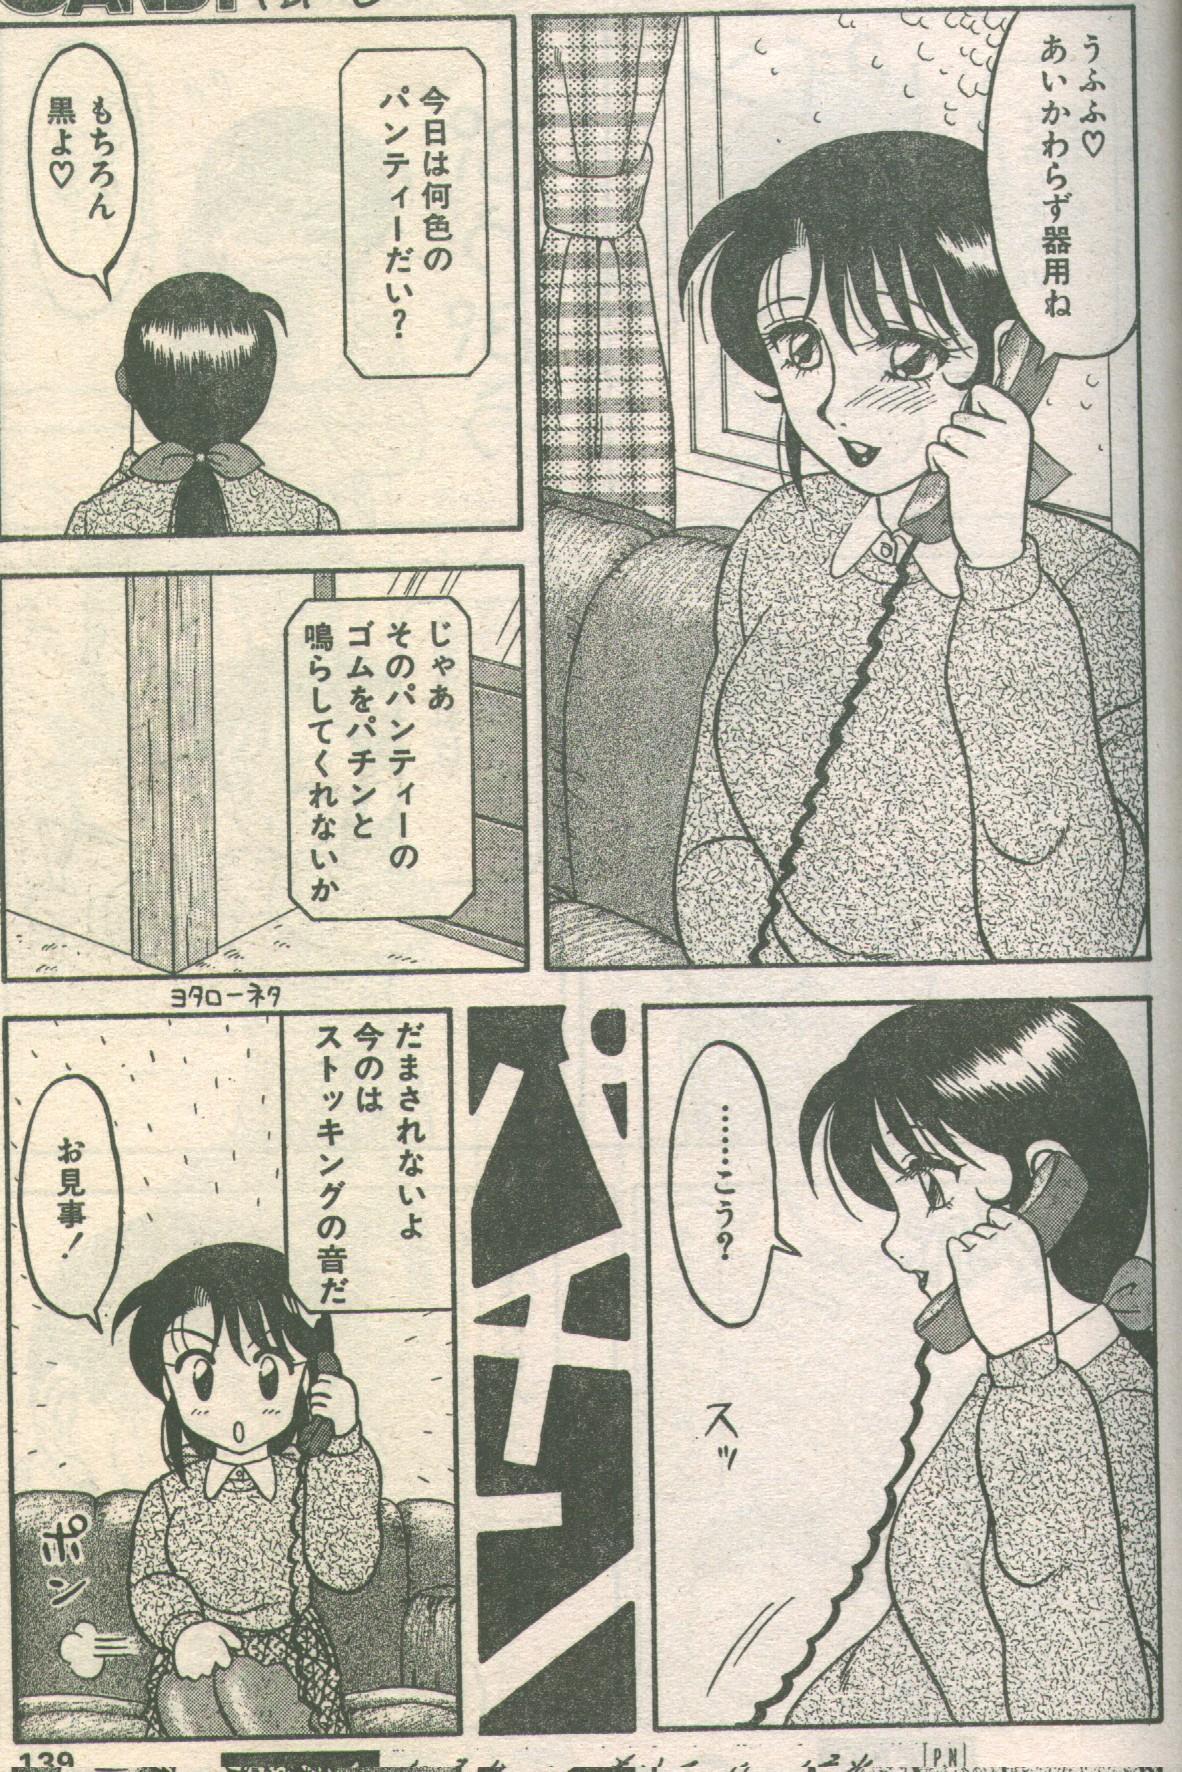 Candy Time 1992-06 [Incomplete] キャンディータイム 1992年06月号 [不完全]